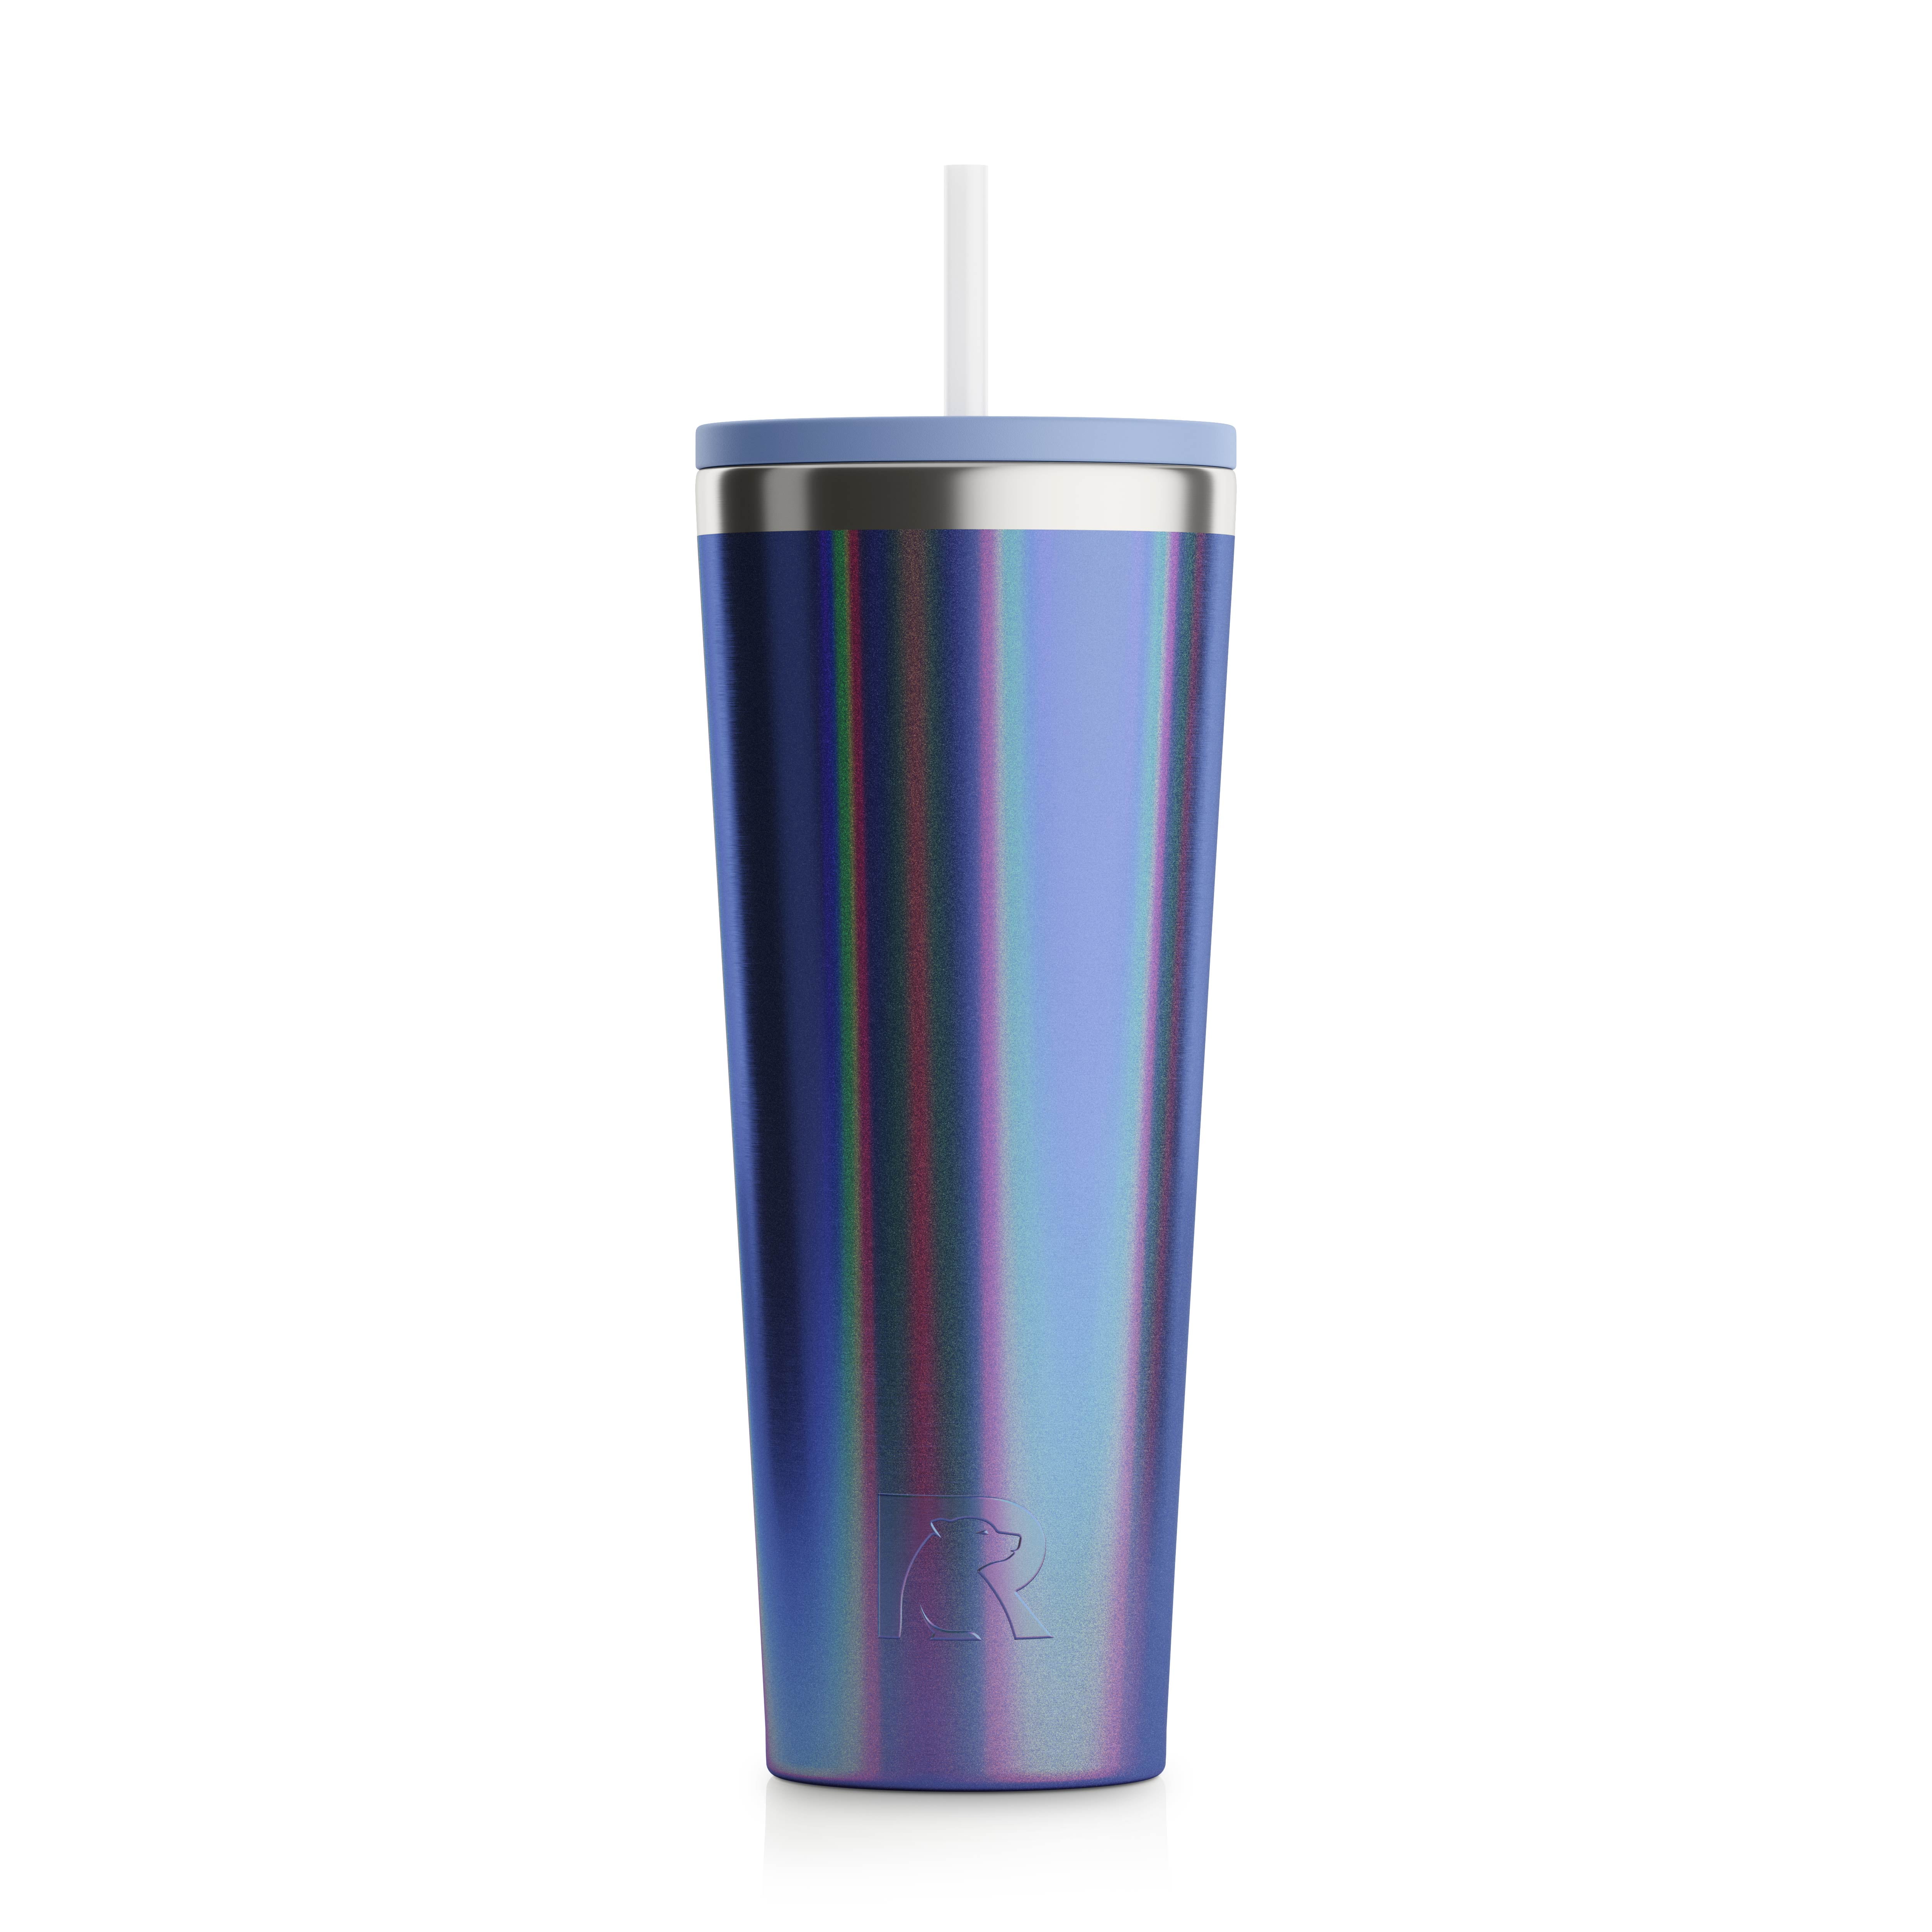 Starbucks Stainless Steel Tumbler, Coffee Cup FREE CUP HOLDER